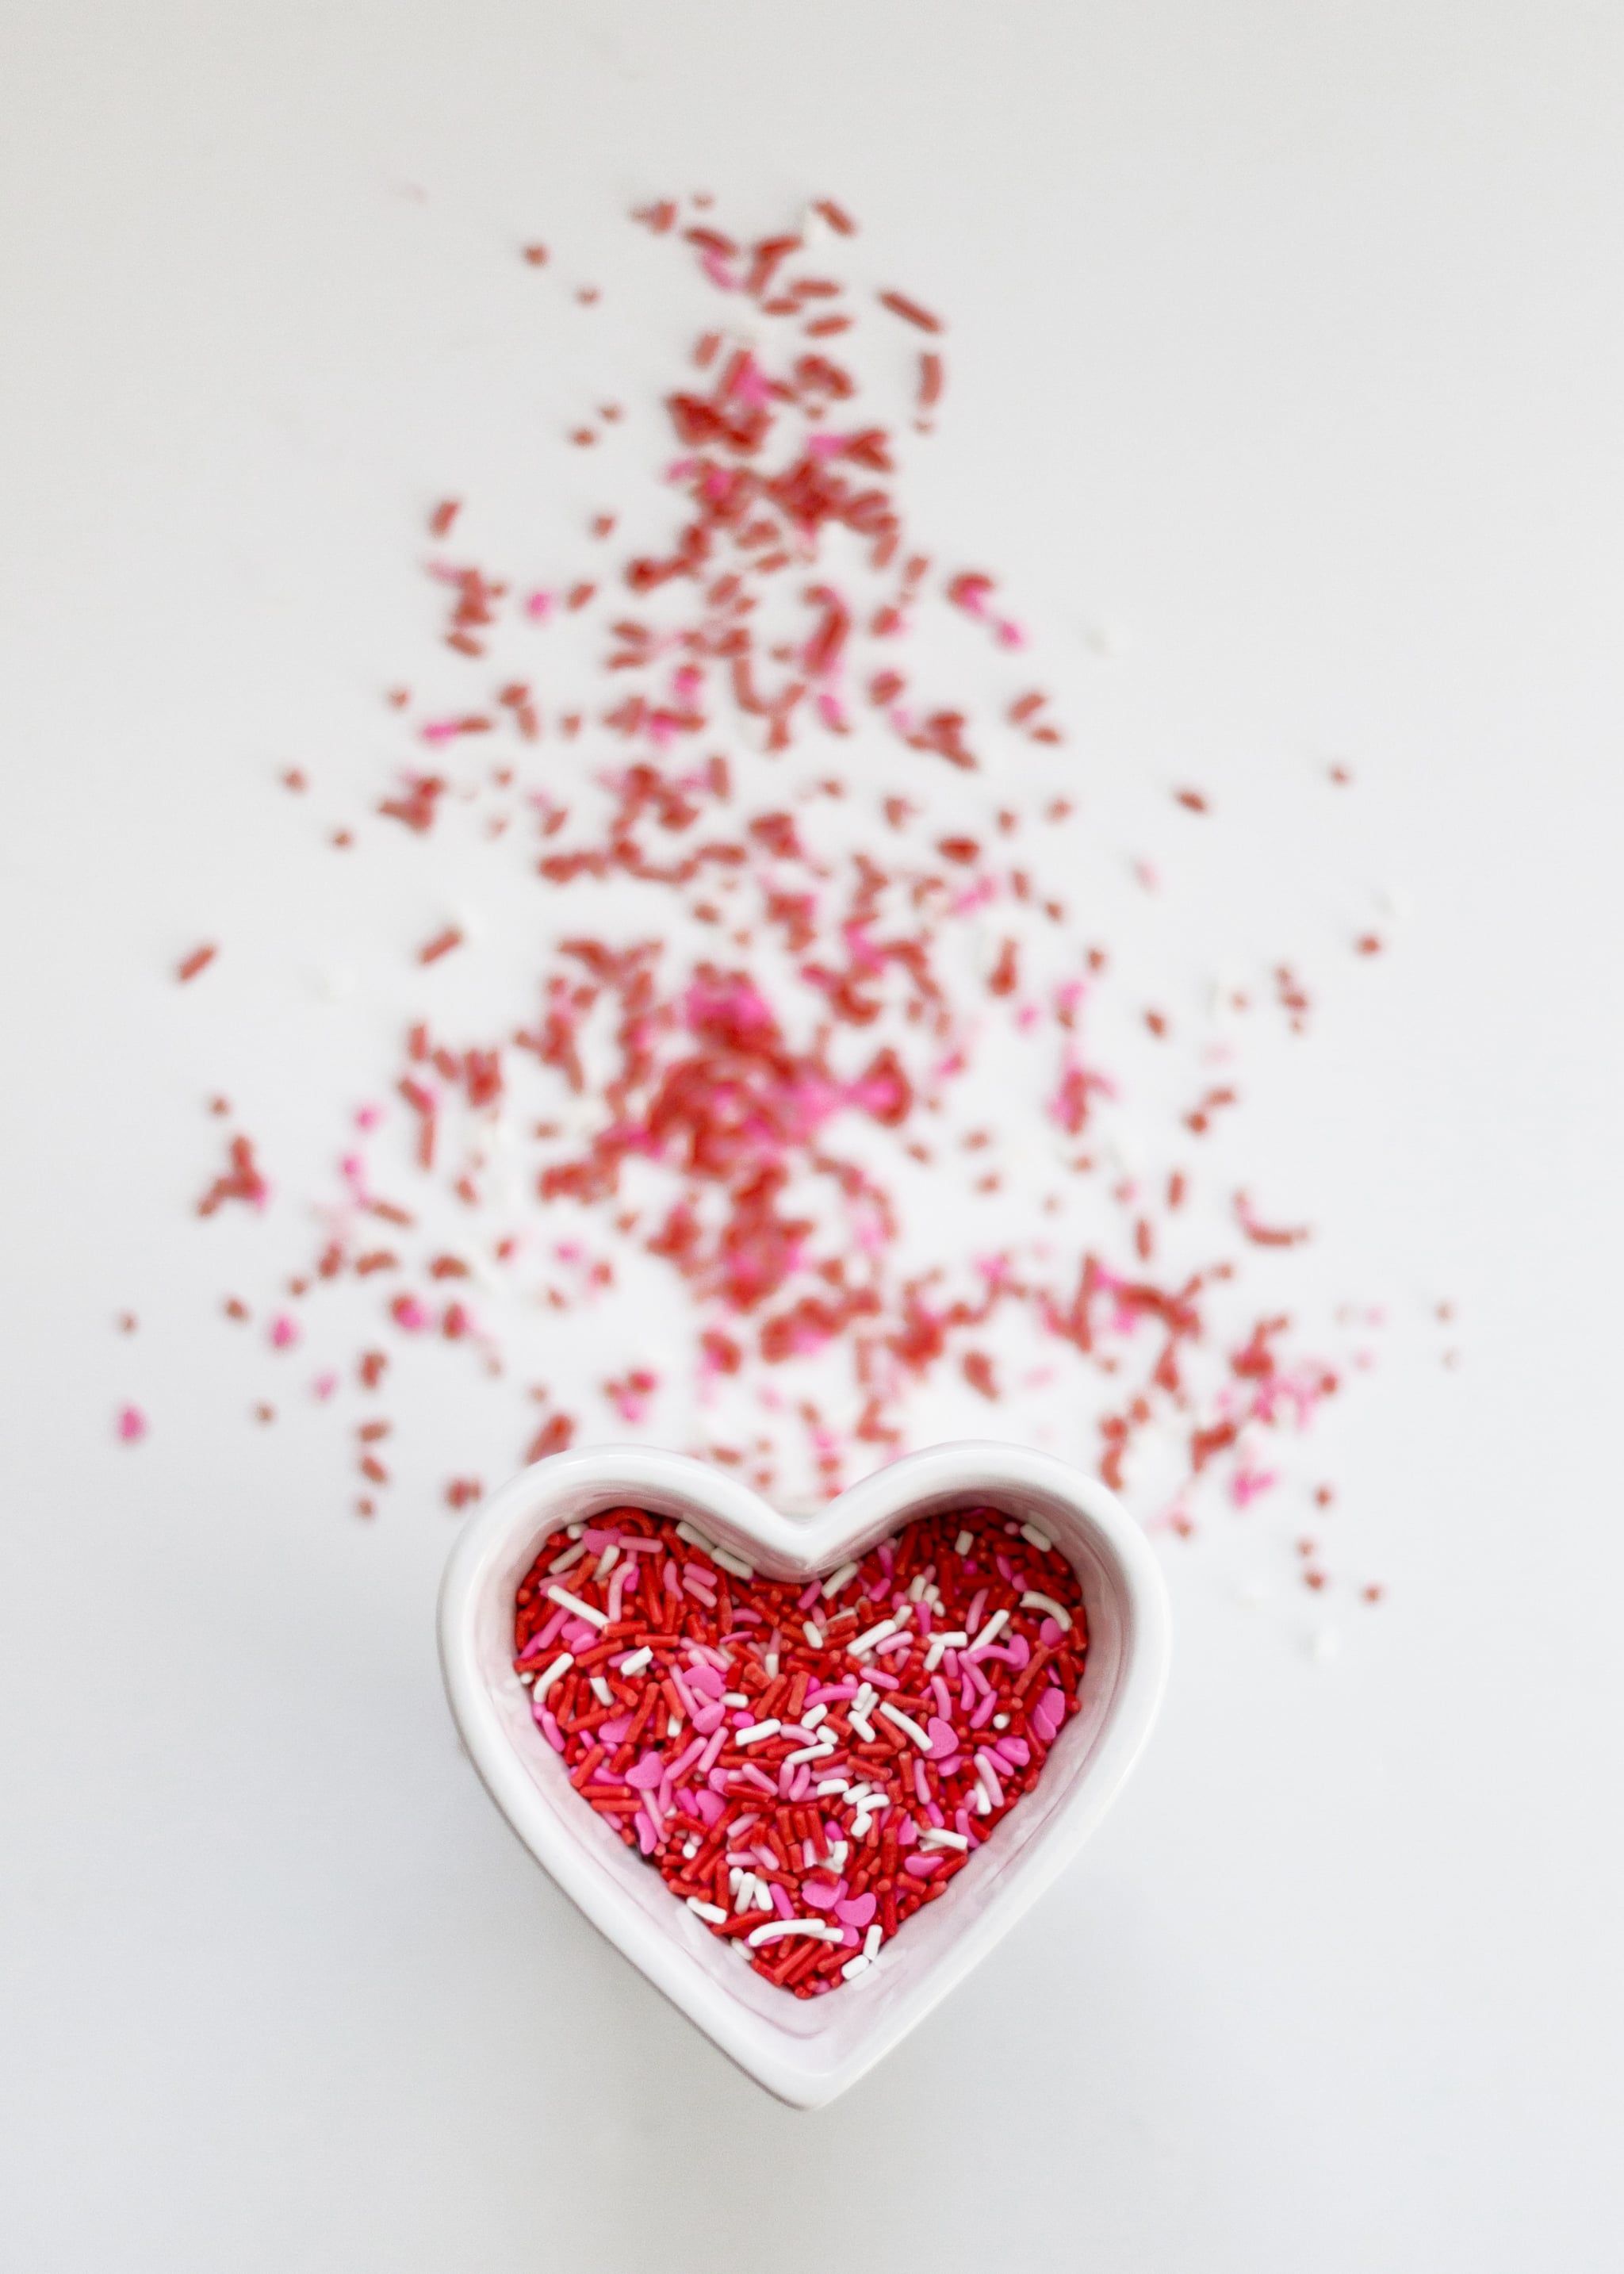 A heart shaped bowl with red and pink sprinkeled in it - Valentine's Day